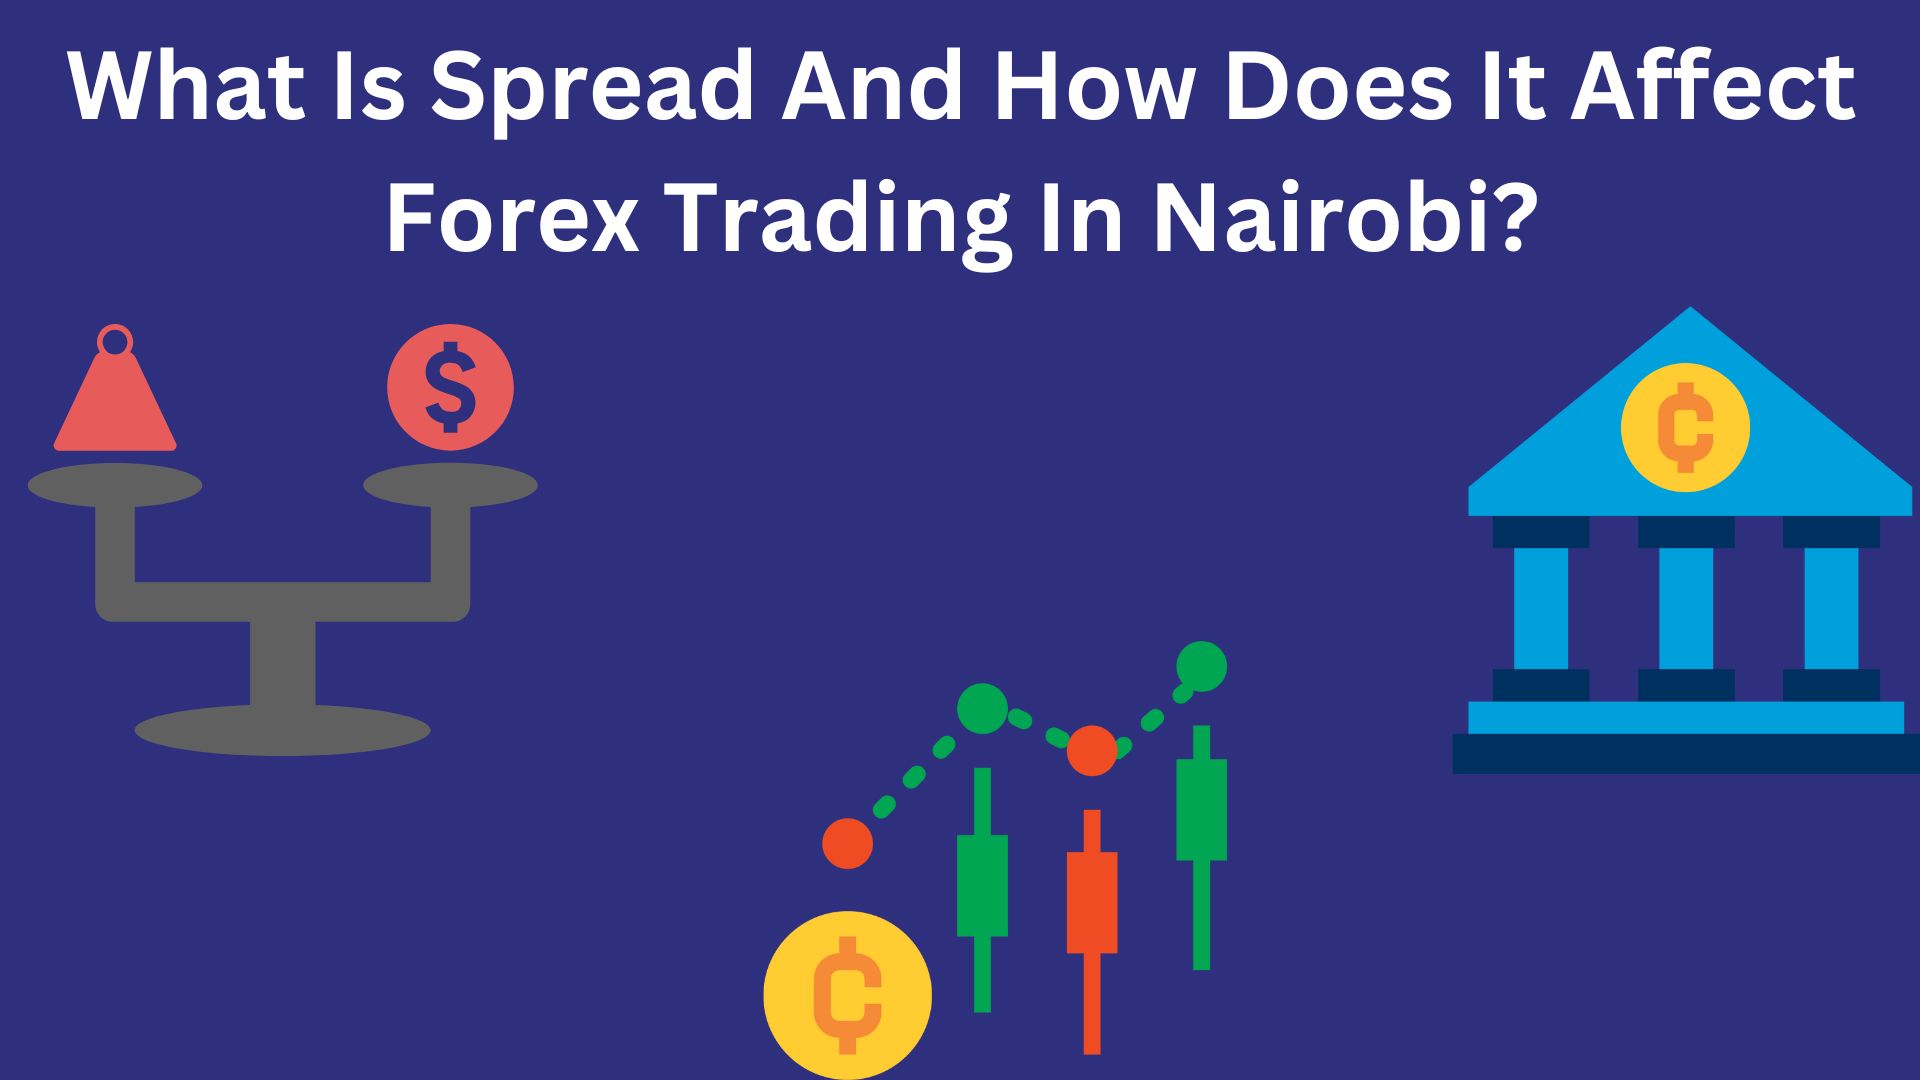 What Is Spread And How Does It Affect Forex Trading In Nairobi